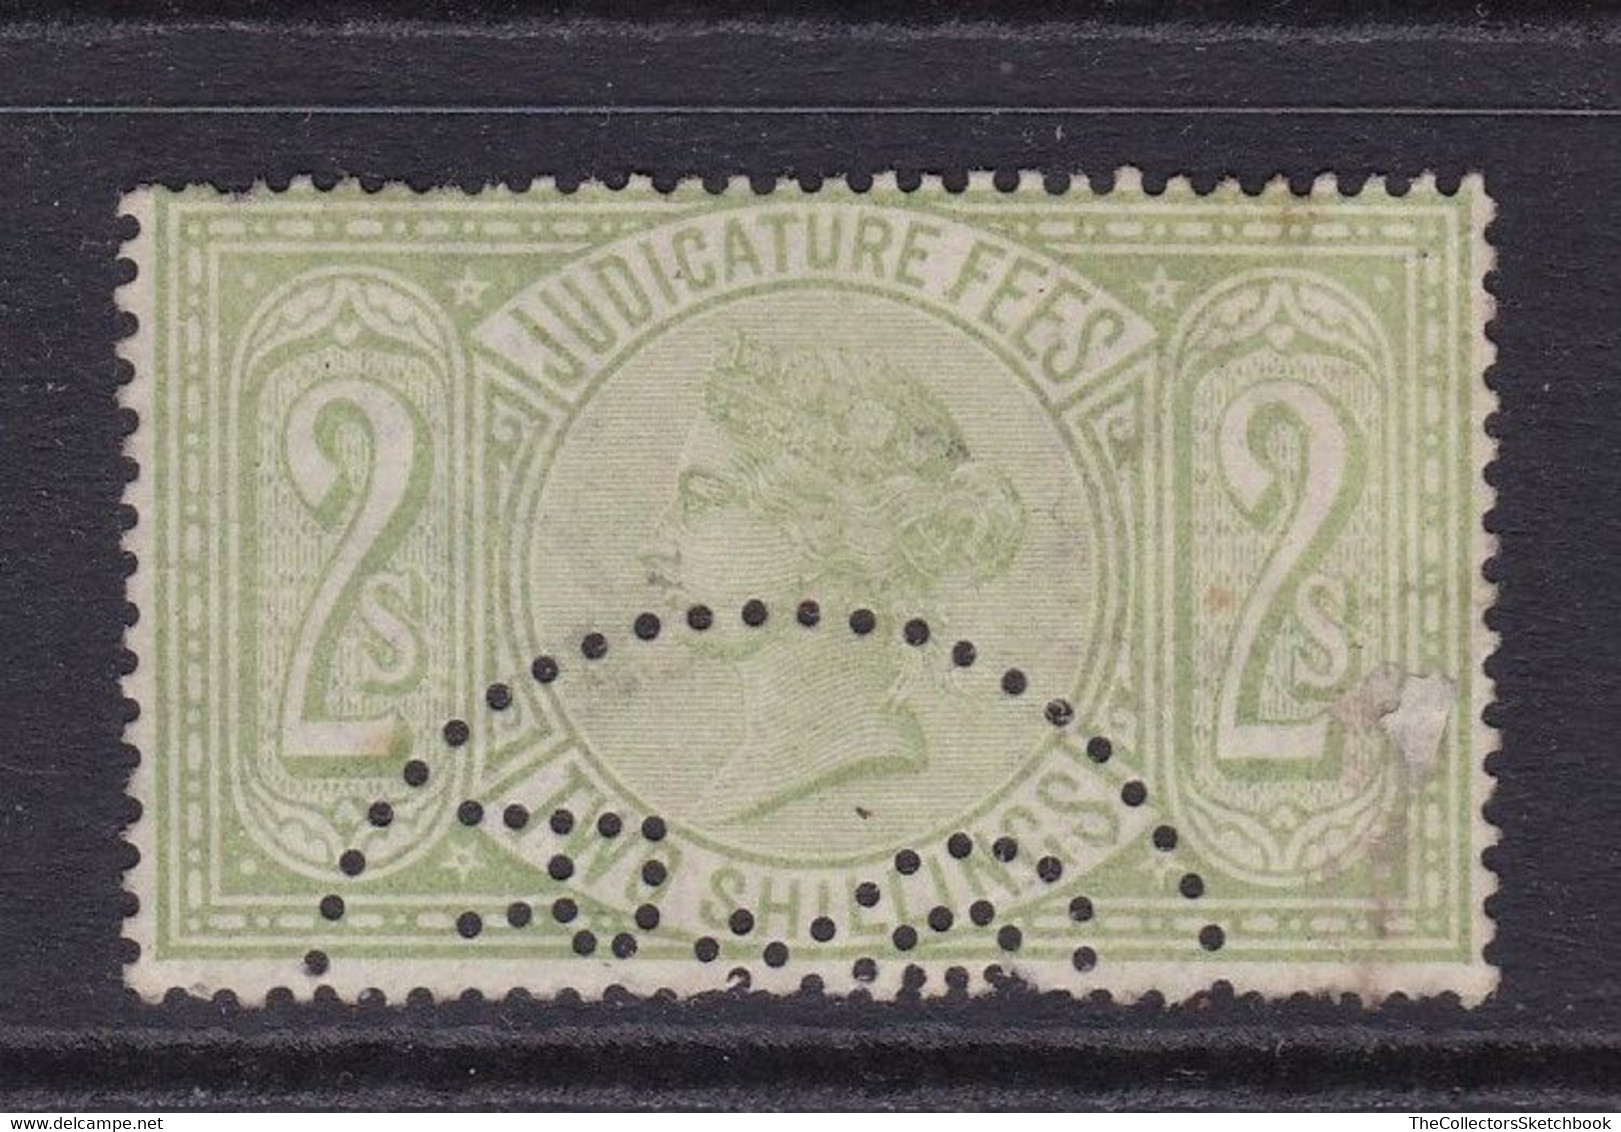 GB Fiscal/ Revenue Stamp.  Judicature Fees 2/- Green Fine Used. Barefoot 35 - Fiscaux